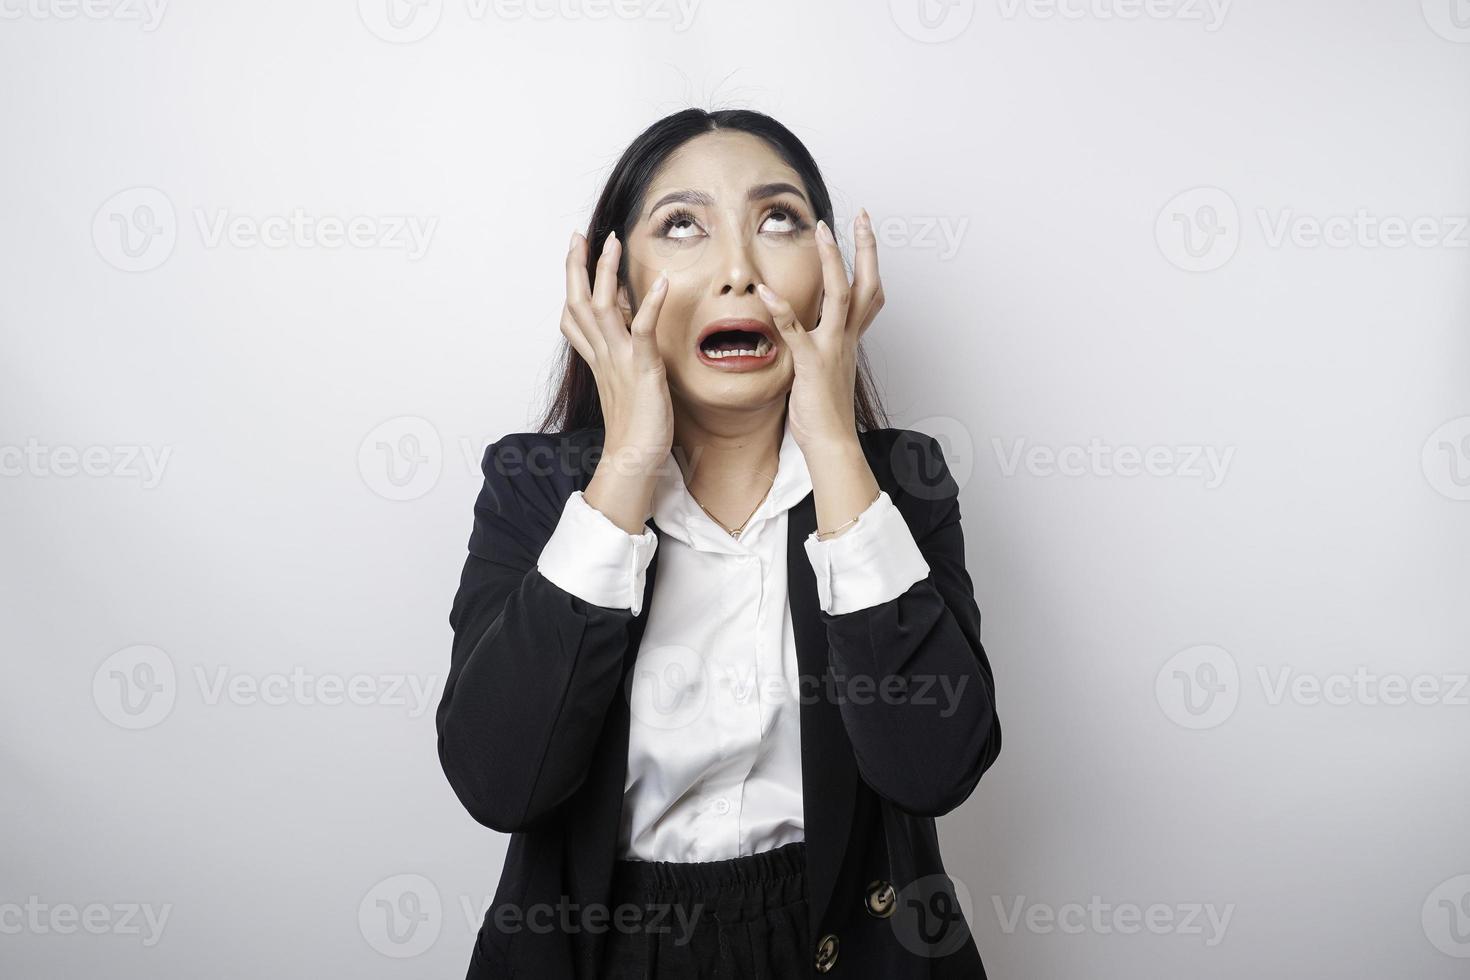 A portrait of an Asian business woman wearing a black suit isolated by white background looks depressed photo